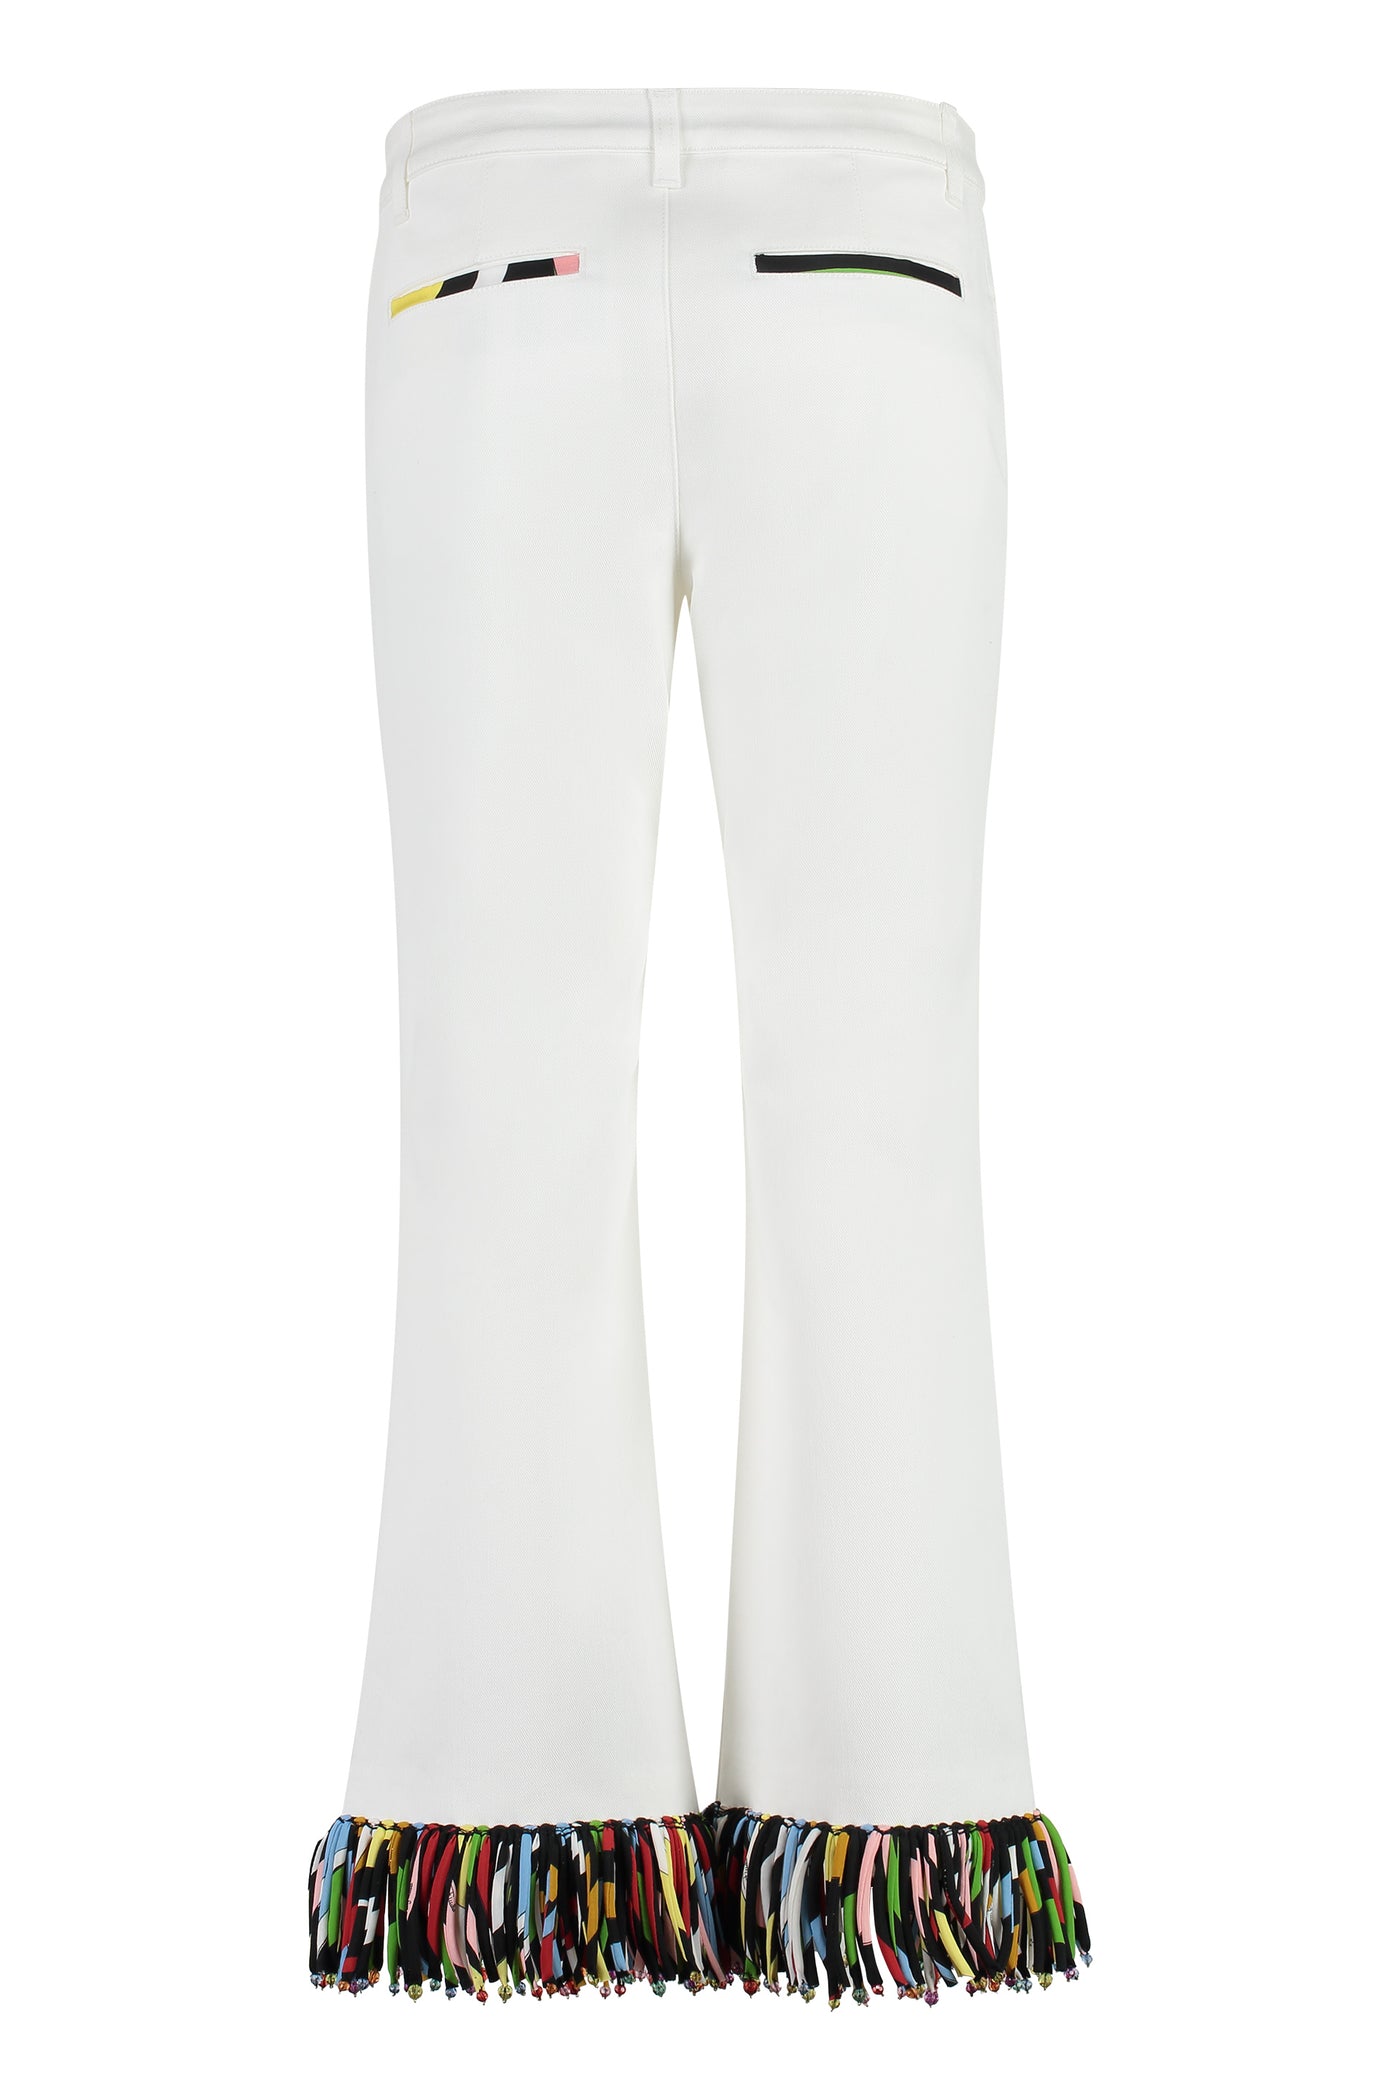 100 EMILIO PUCCI CROPPED FLARED TROUSERS